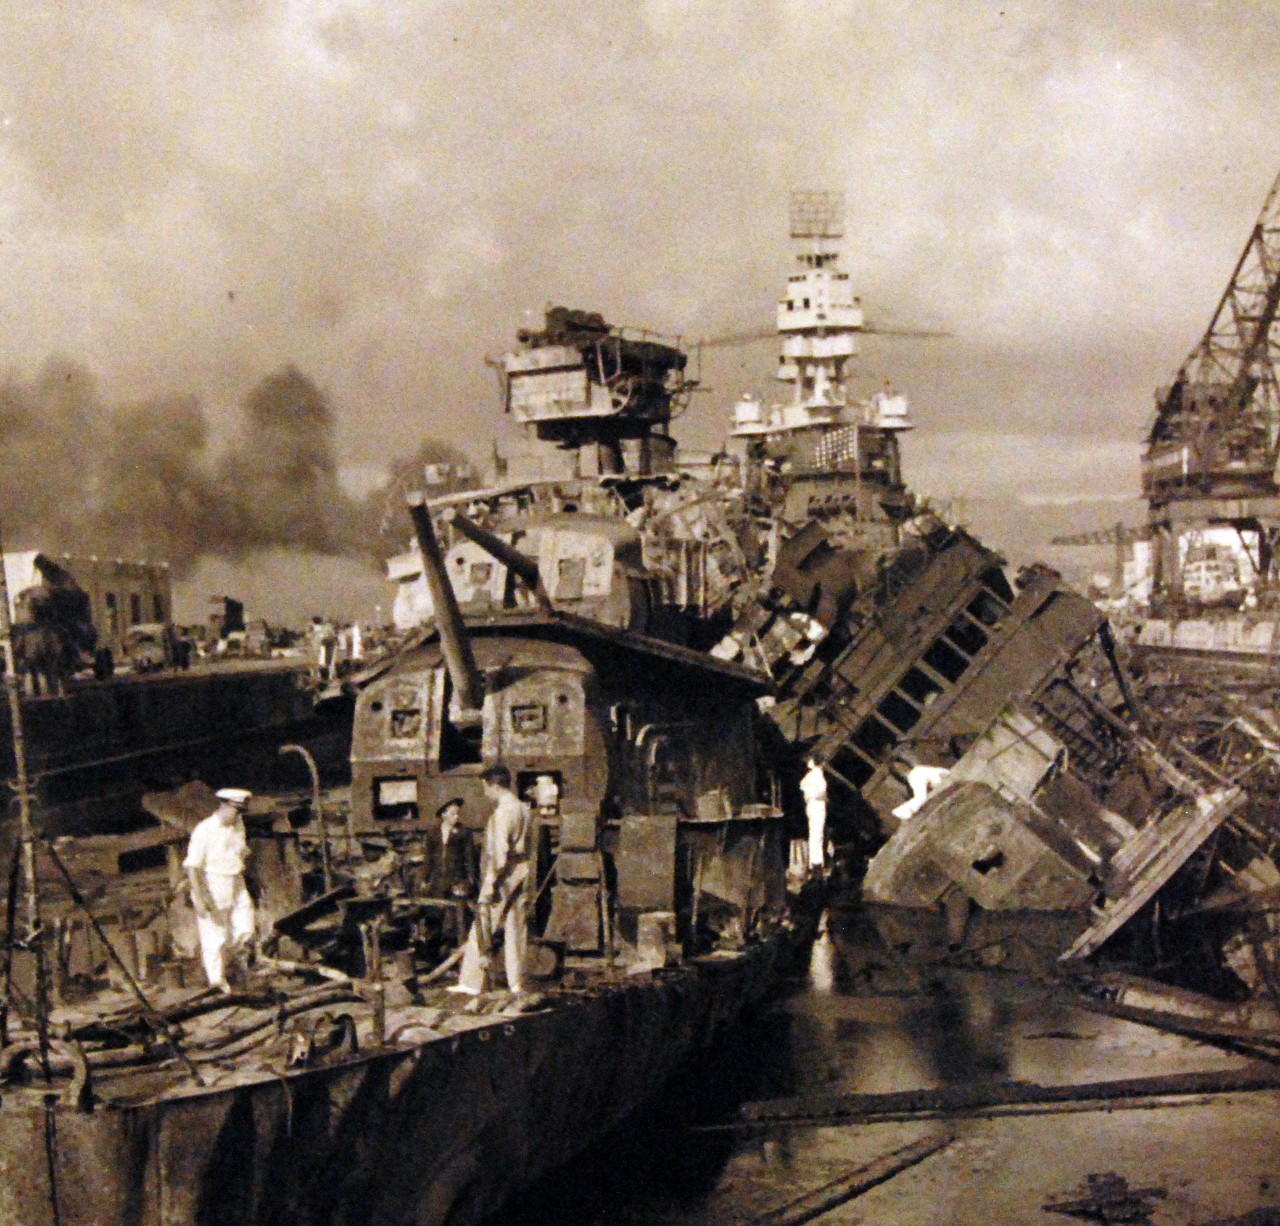 80-G-32763:   Japanese Attack on Pearl Harbor, December 7, 1941.  Wreckage of USS Cassin (DD 372) and USS Downes (DD 375) in Drydock Number 1.   USS Pennsylvania (BB 38) is in the background.  Official U.S. Navy photograph, now in the collections of the National Archives. (9/9/2015).